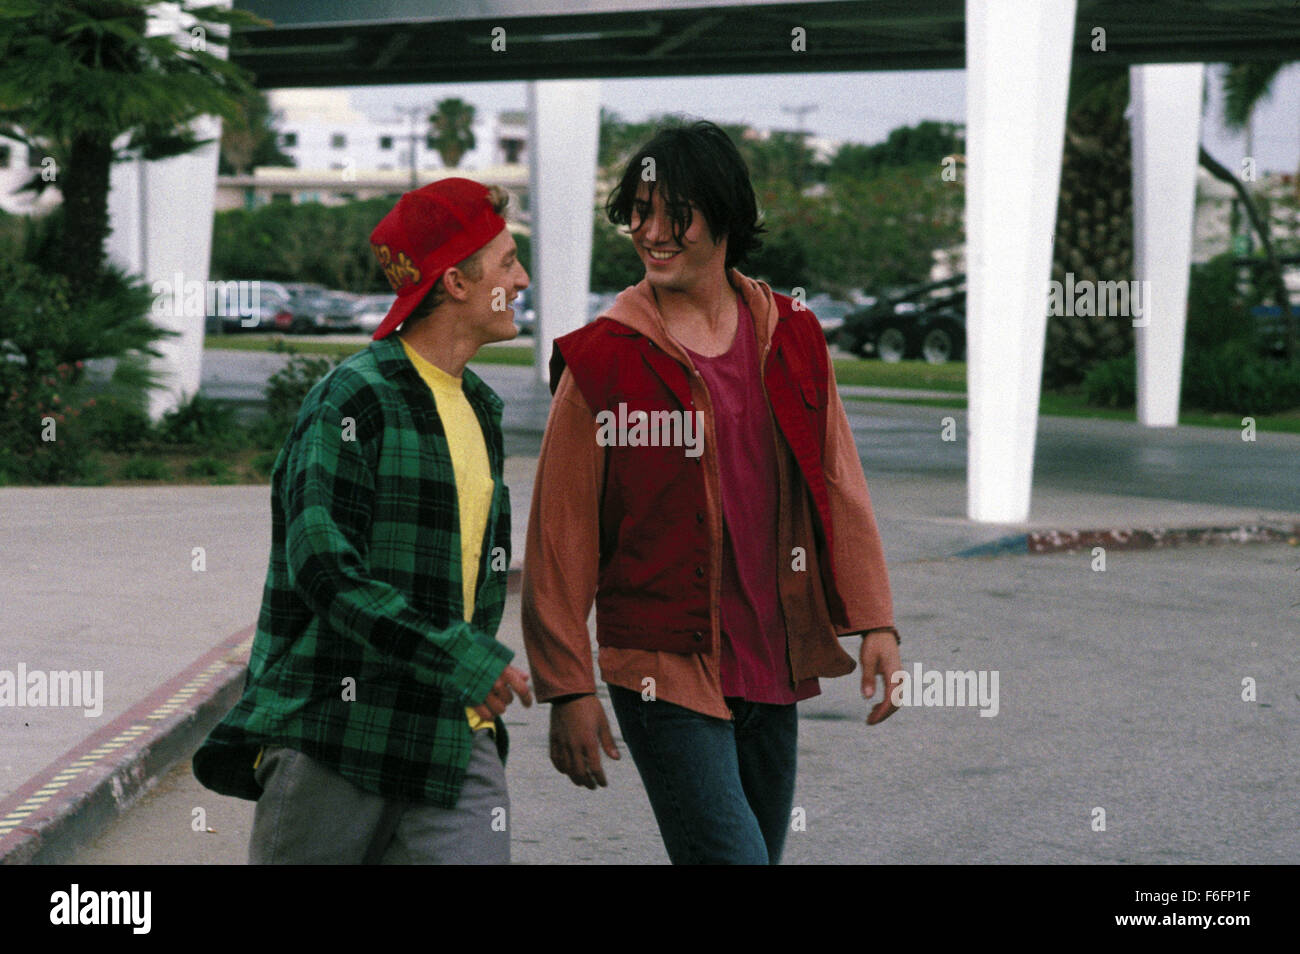 Jul 19, 1991; Los Angeles, CA, USA; ALEX WINTERS (left) as Bill S. Preston, Esq. and KEANU REEVES as Ted Logan in the adventure, sci-fi, comic film 'Bill and Ted's Bogus Journey' directed by Peter Hewitt. Stock Photo